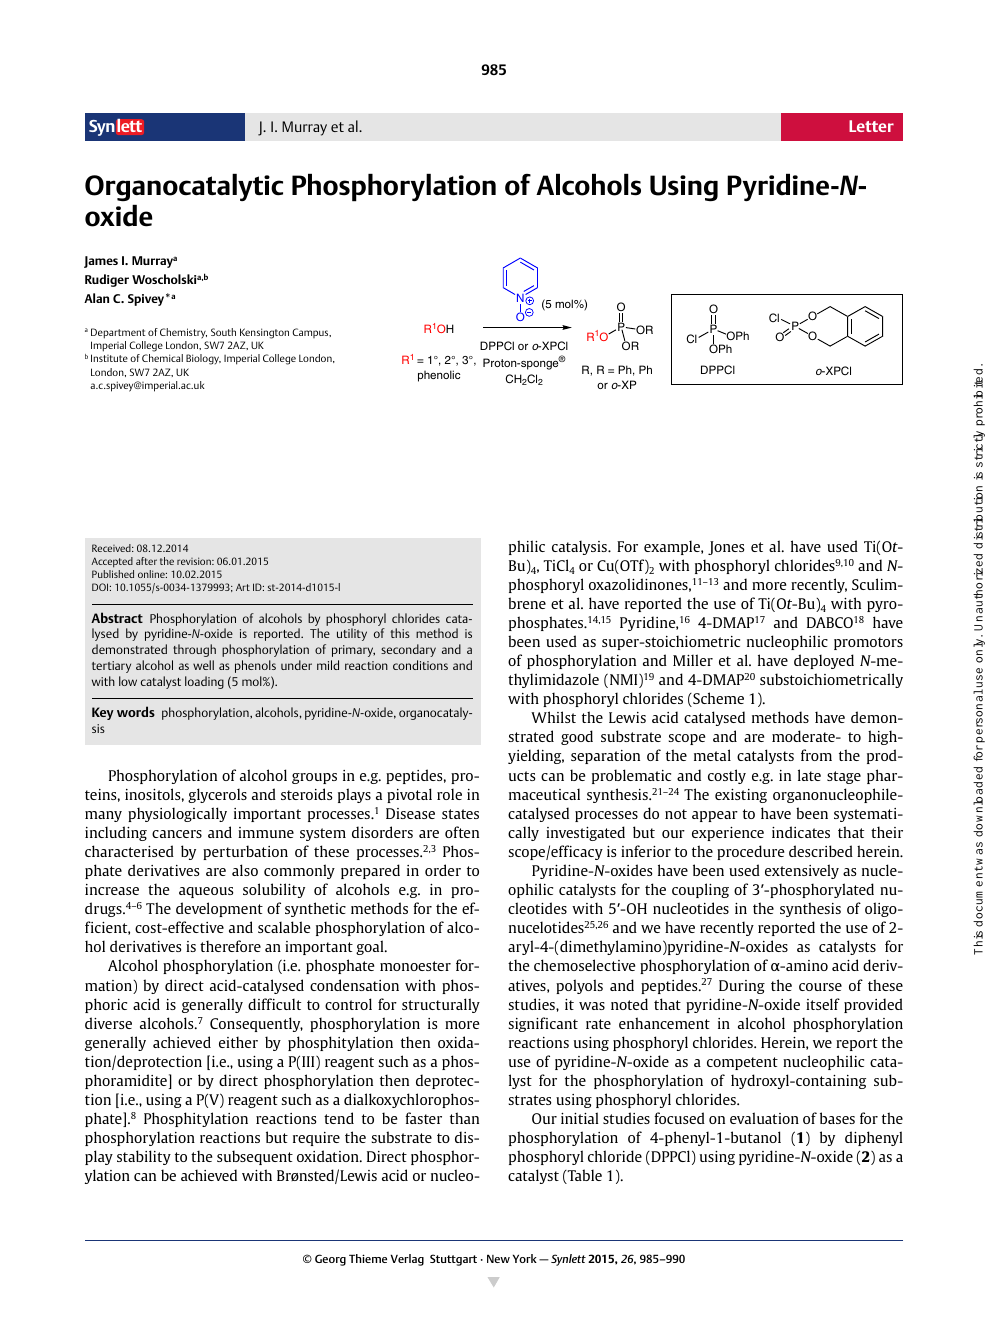 Organocatalytic Phosphorylation Of Alcohols Using Pyridine N Oxide Topic Of Research Paper In Chemical Sciences Download Scholarly Article Pdf And Read For Free On Cyberleninka Open Science Hub